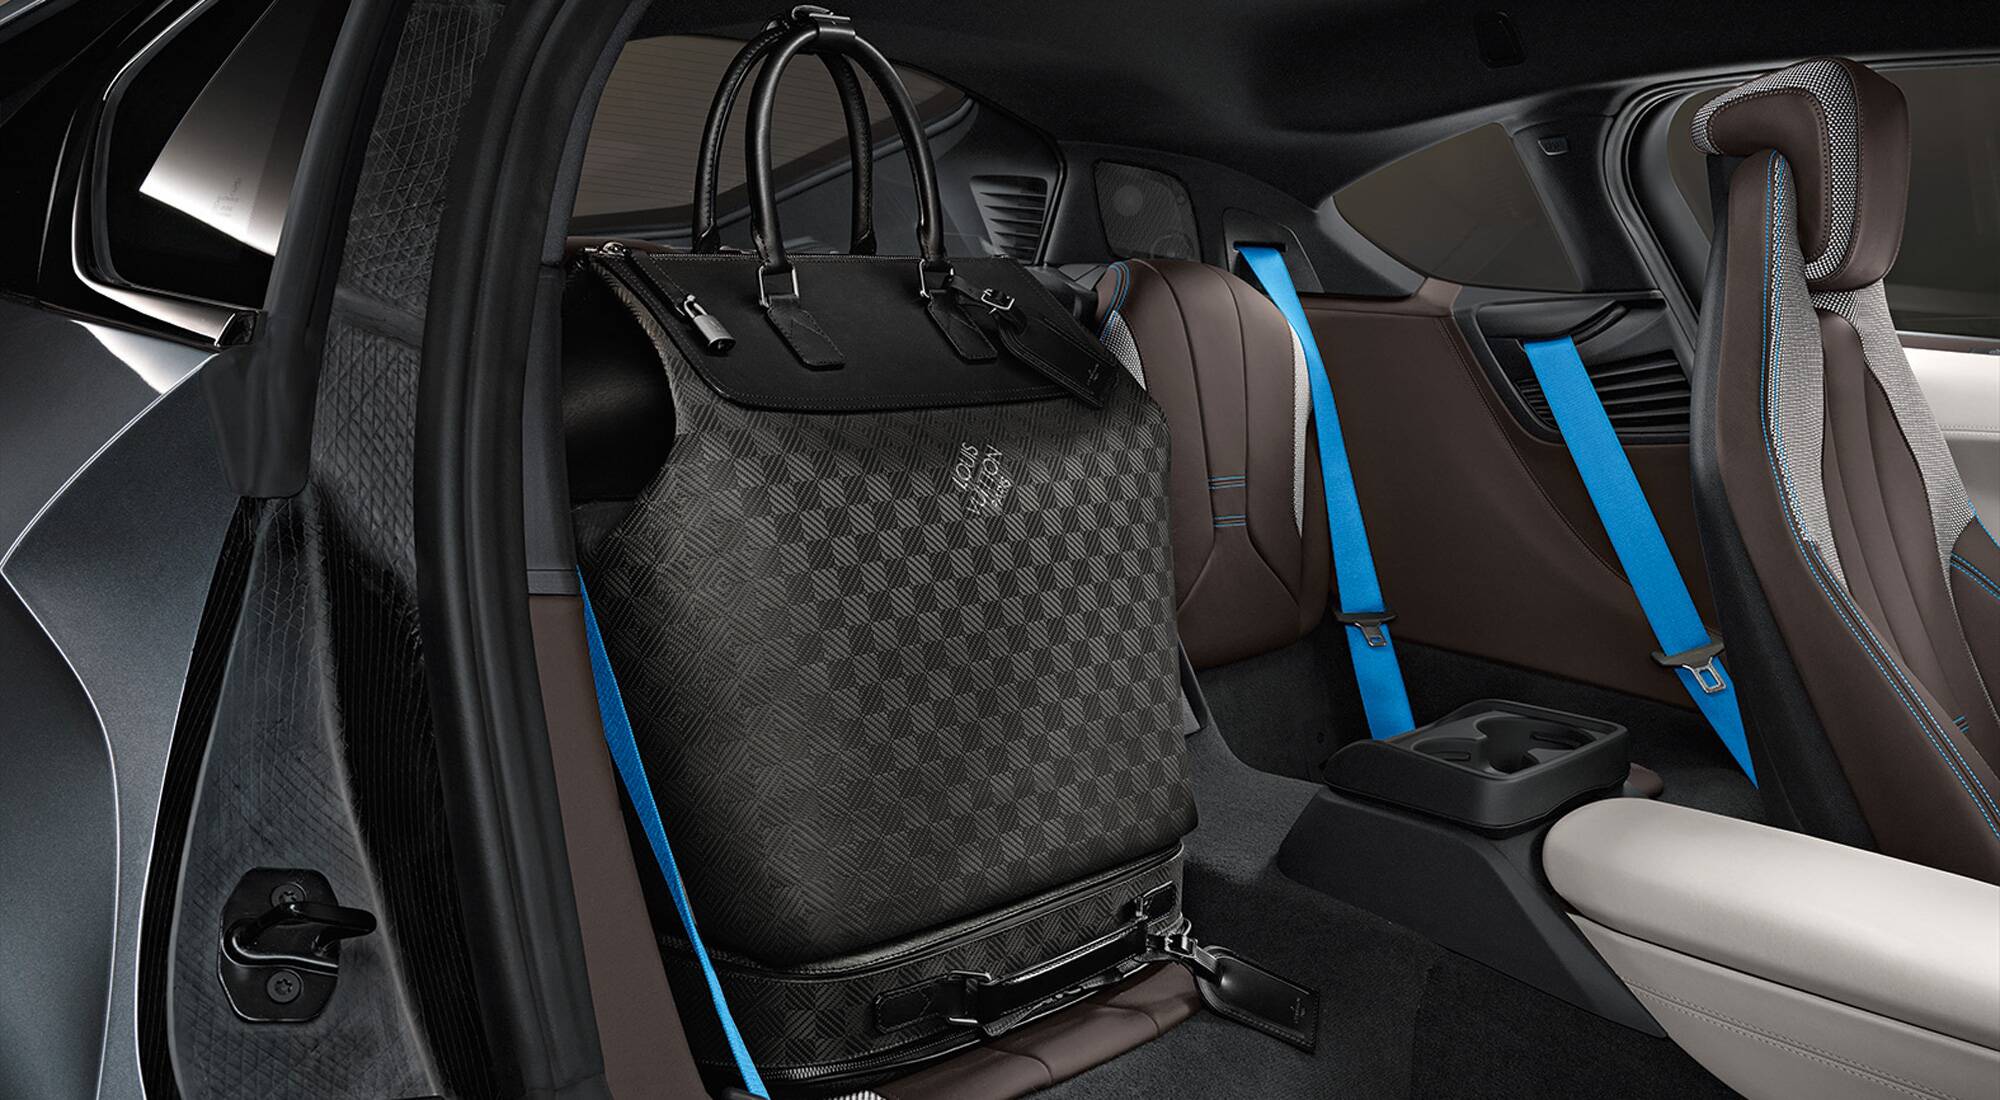 Overview Of BMW And Louis Vuitton Formulating Dual Branding